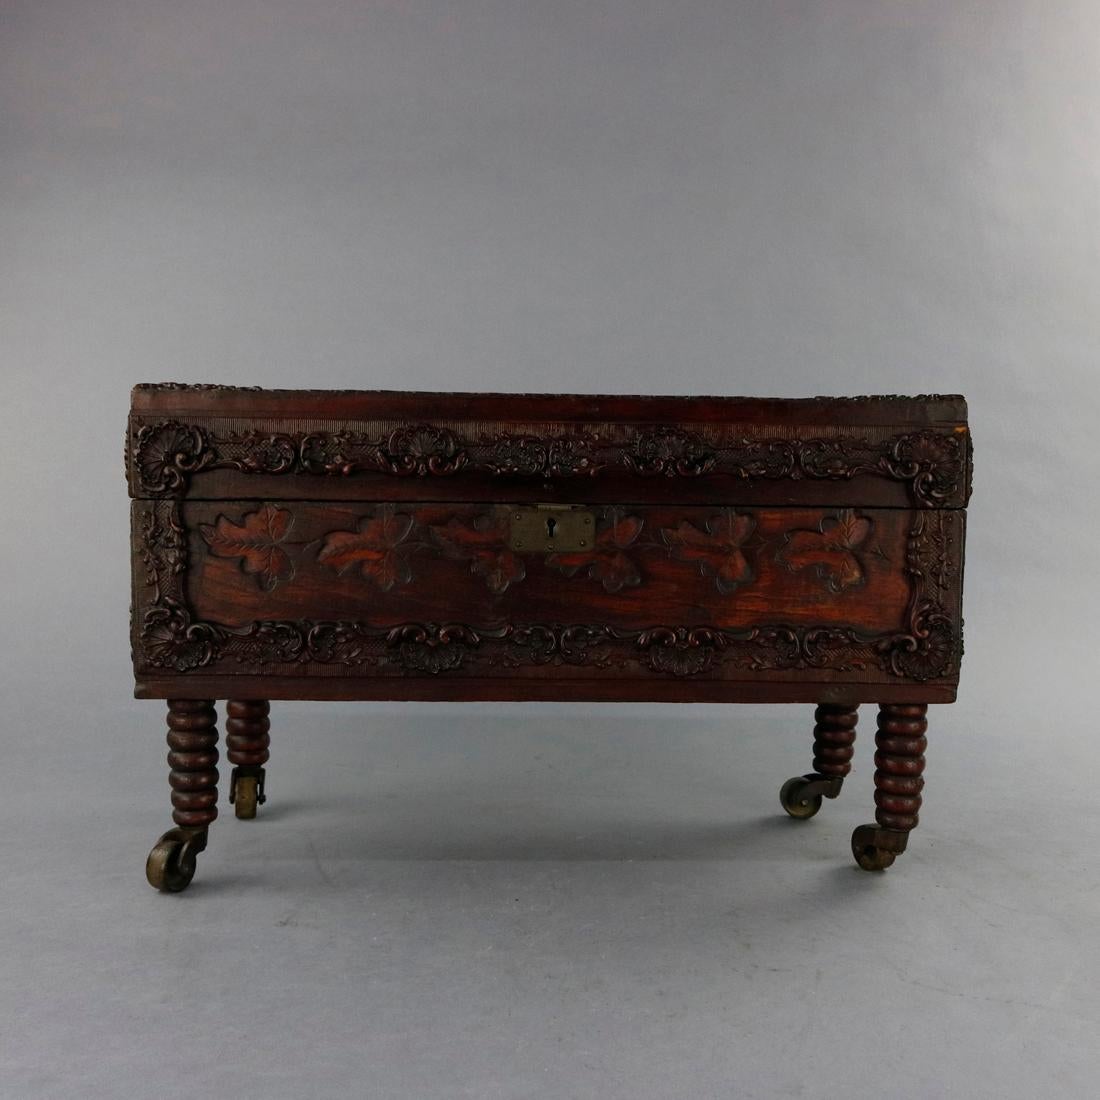 An antique Victorian document bo offers mahogany construction with allover carved foliate decoration, hinged lid, and raised on turned legs with casters, c1880.

Measures: 11